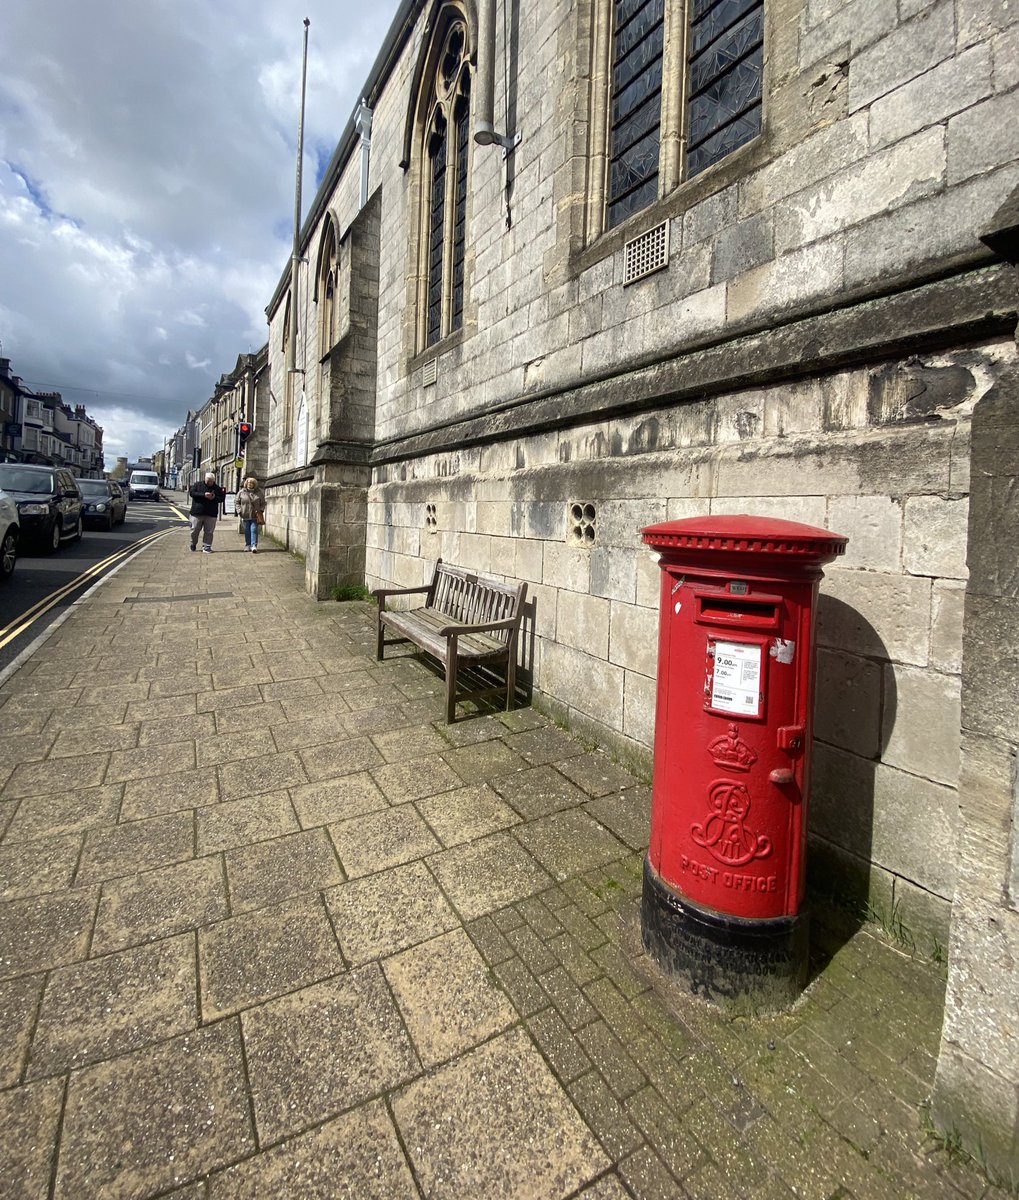 It doesn’t get more Dorset than this! 
Near Dorset Museum on Tuesday. A nice Edward VIII example, beautifully complemented by the stonework. 

#postboxsaturday @letterappsoc